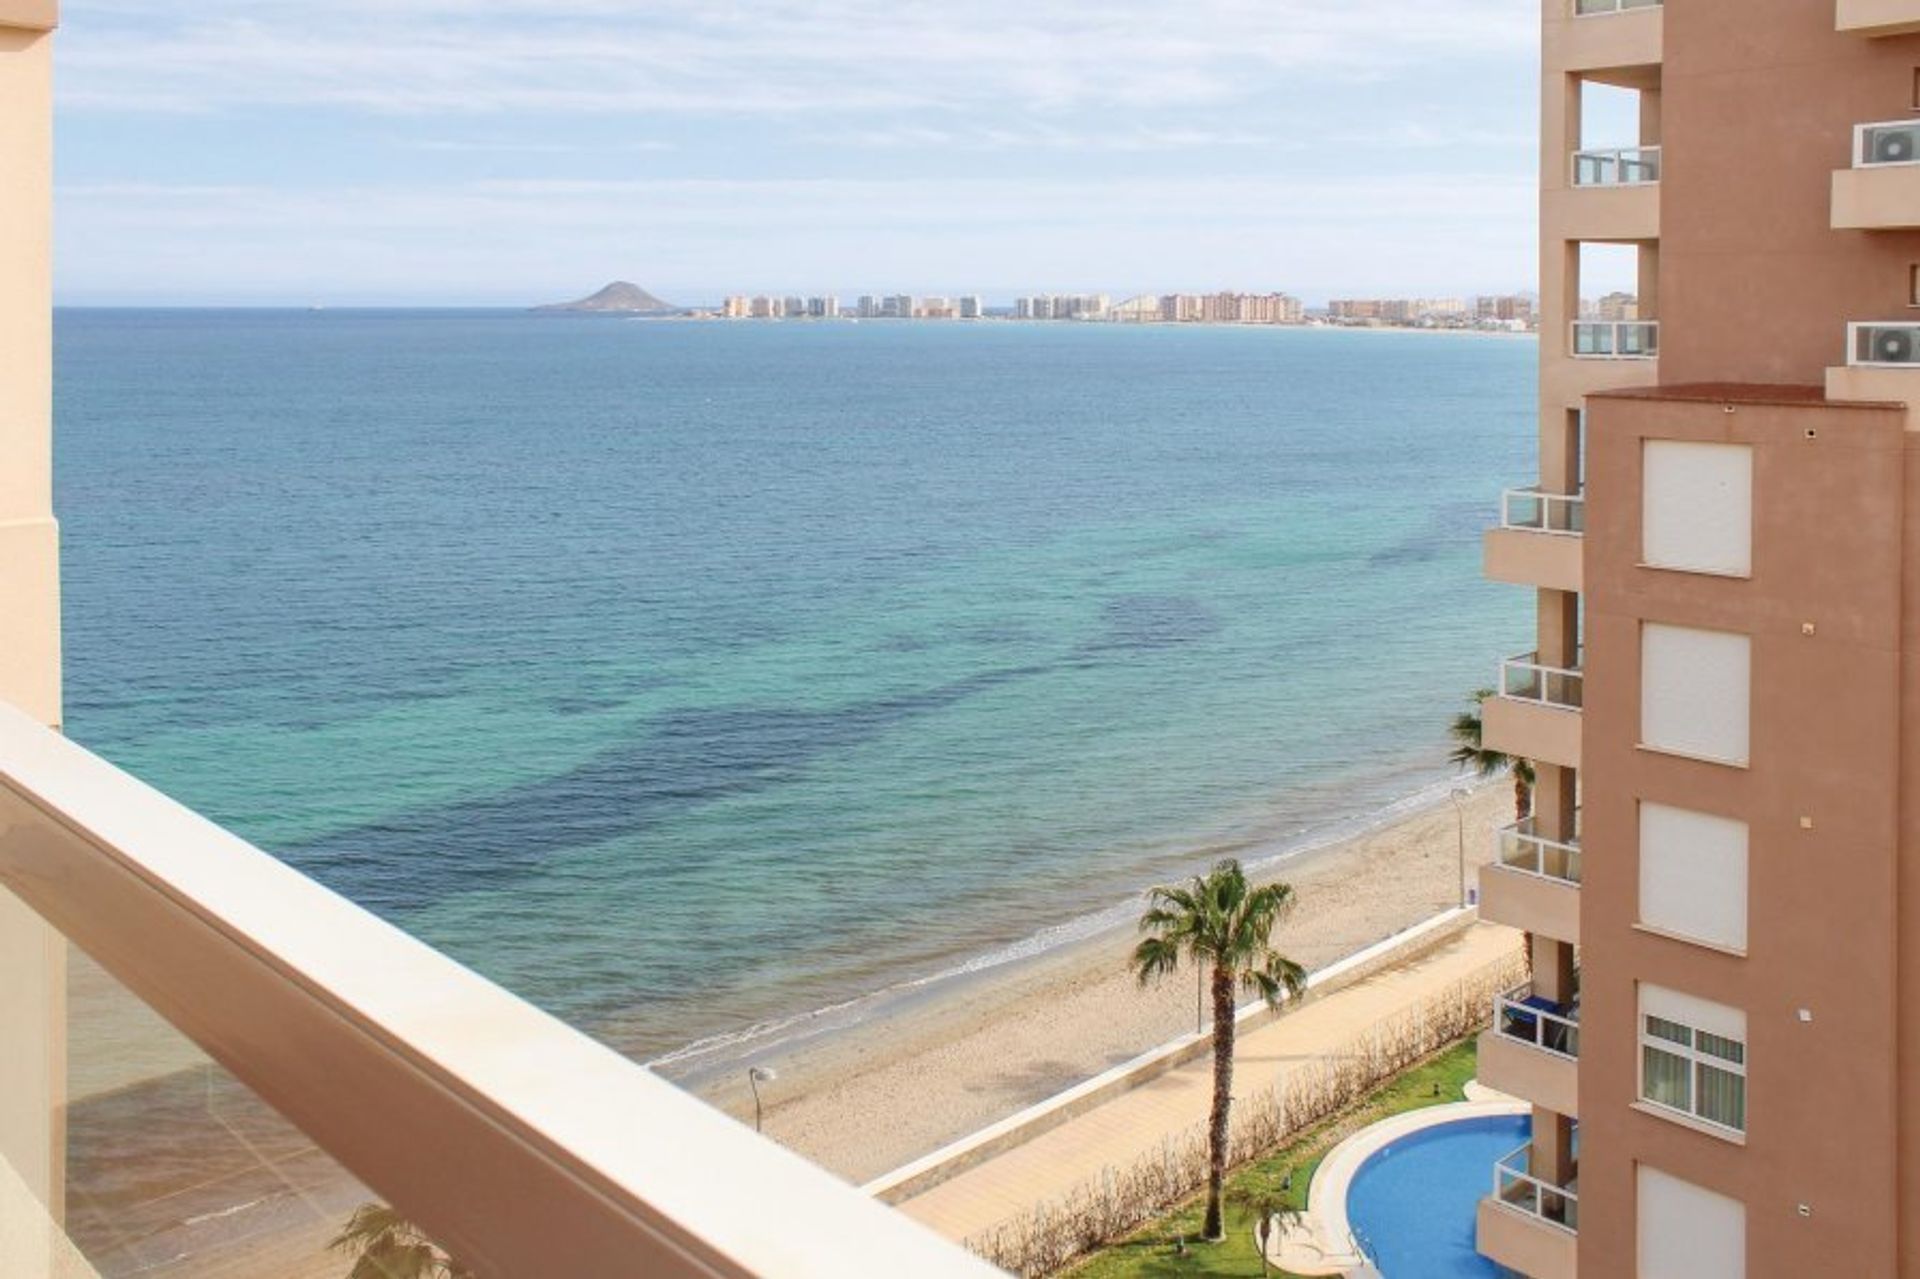 Stay in one of our apartments overlooking the sparkling Mediterranean